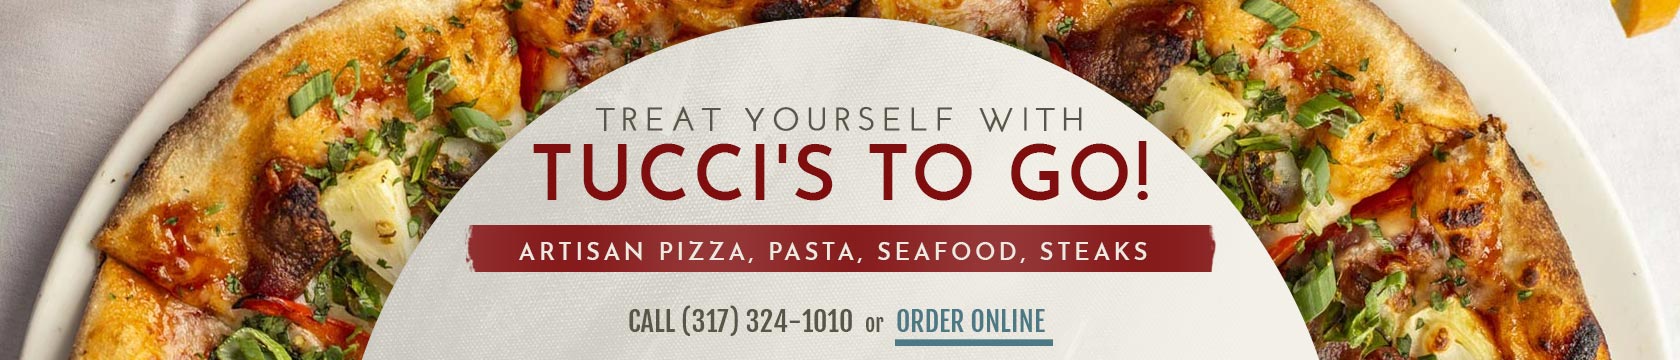 Treat Yourself with Tucci’s To Go! Call us to add cocktails or wine to your order. Order online for carryout or delivery!